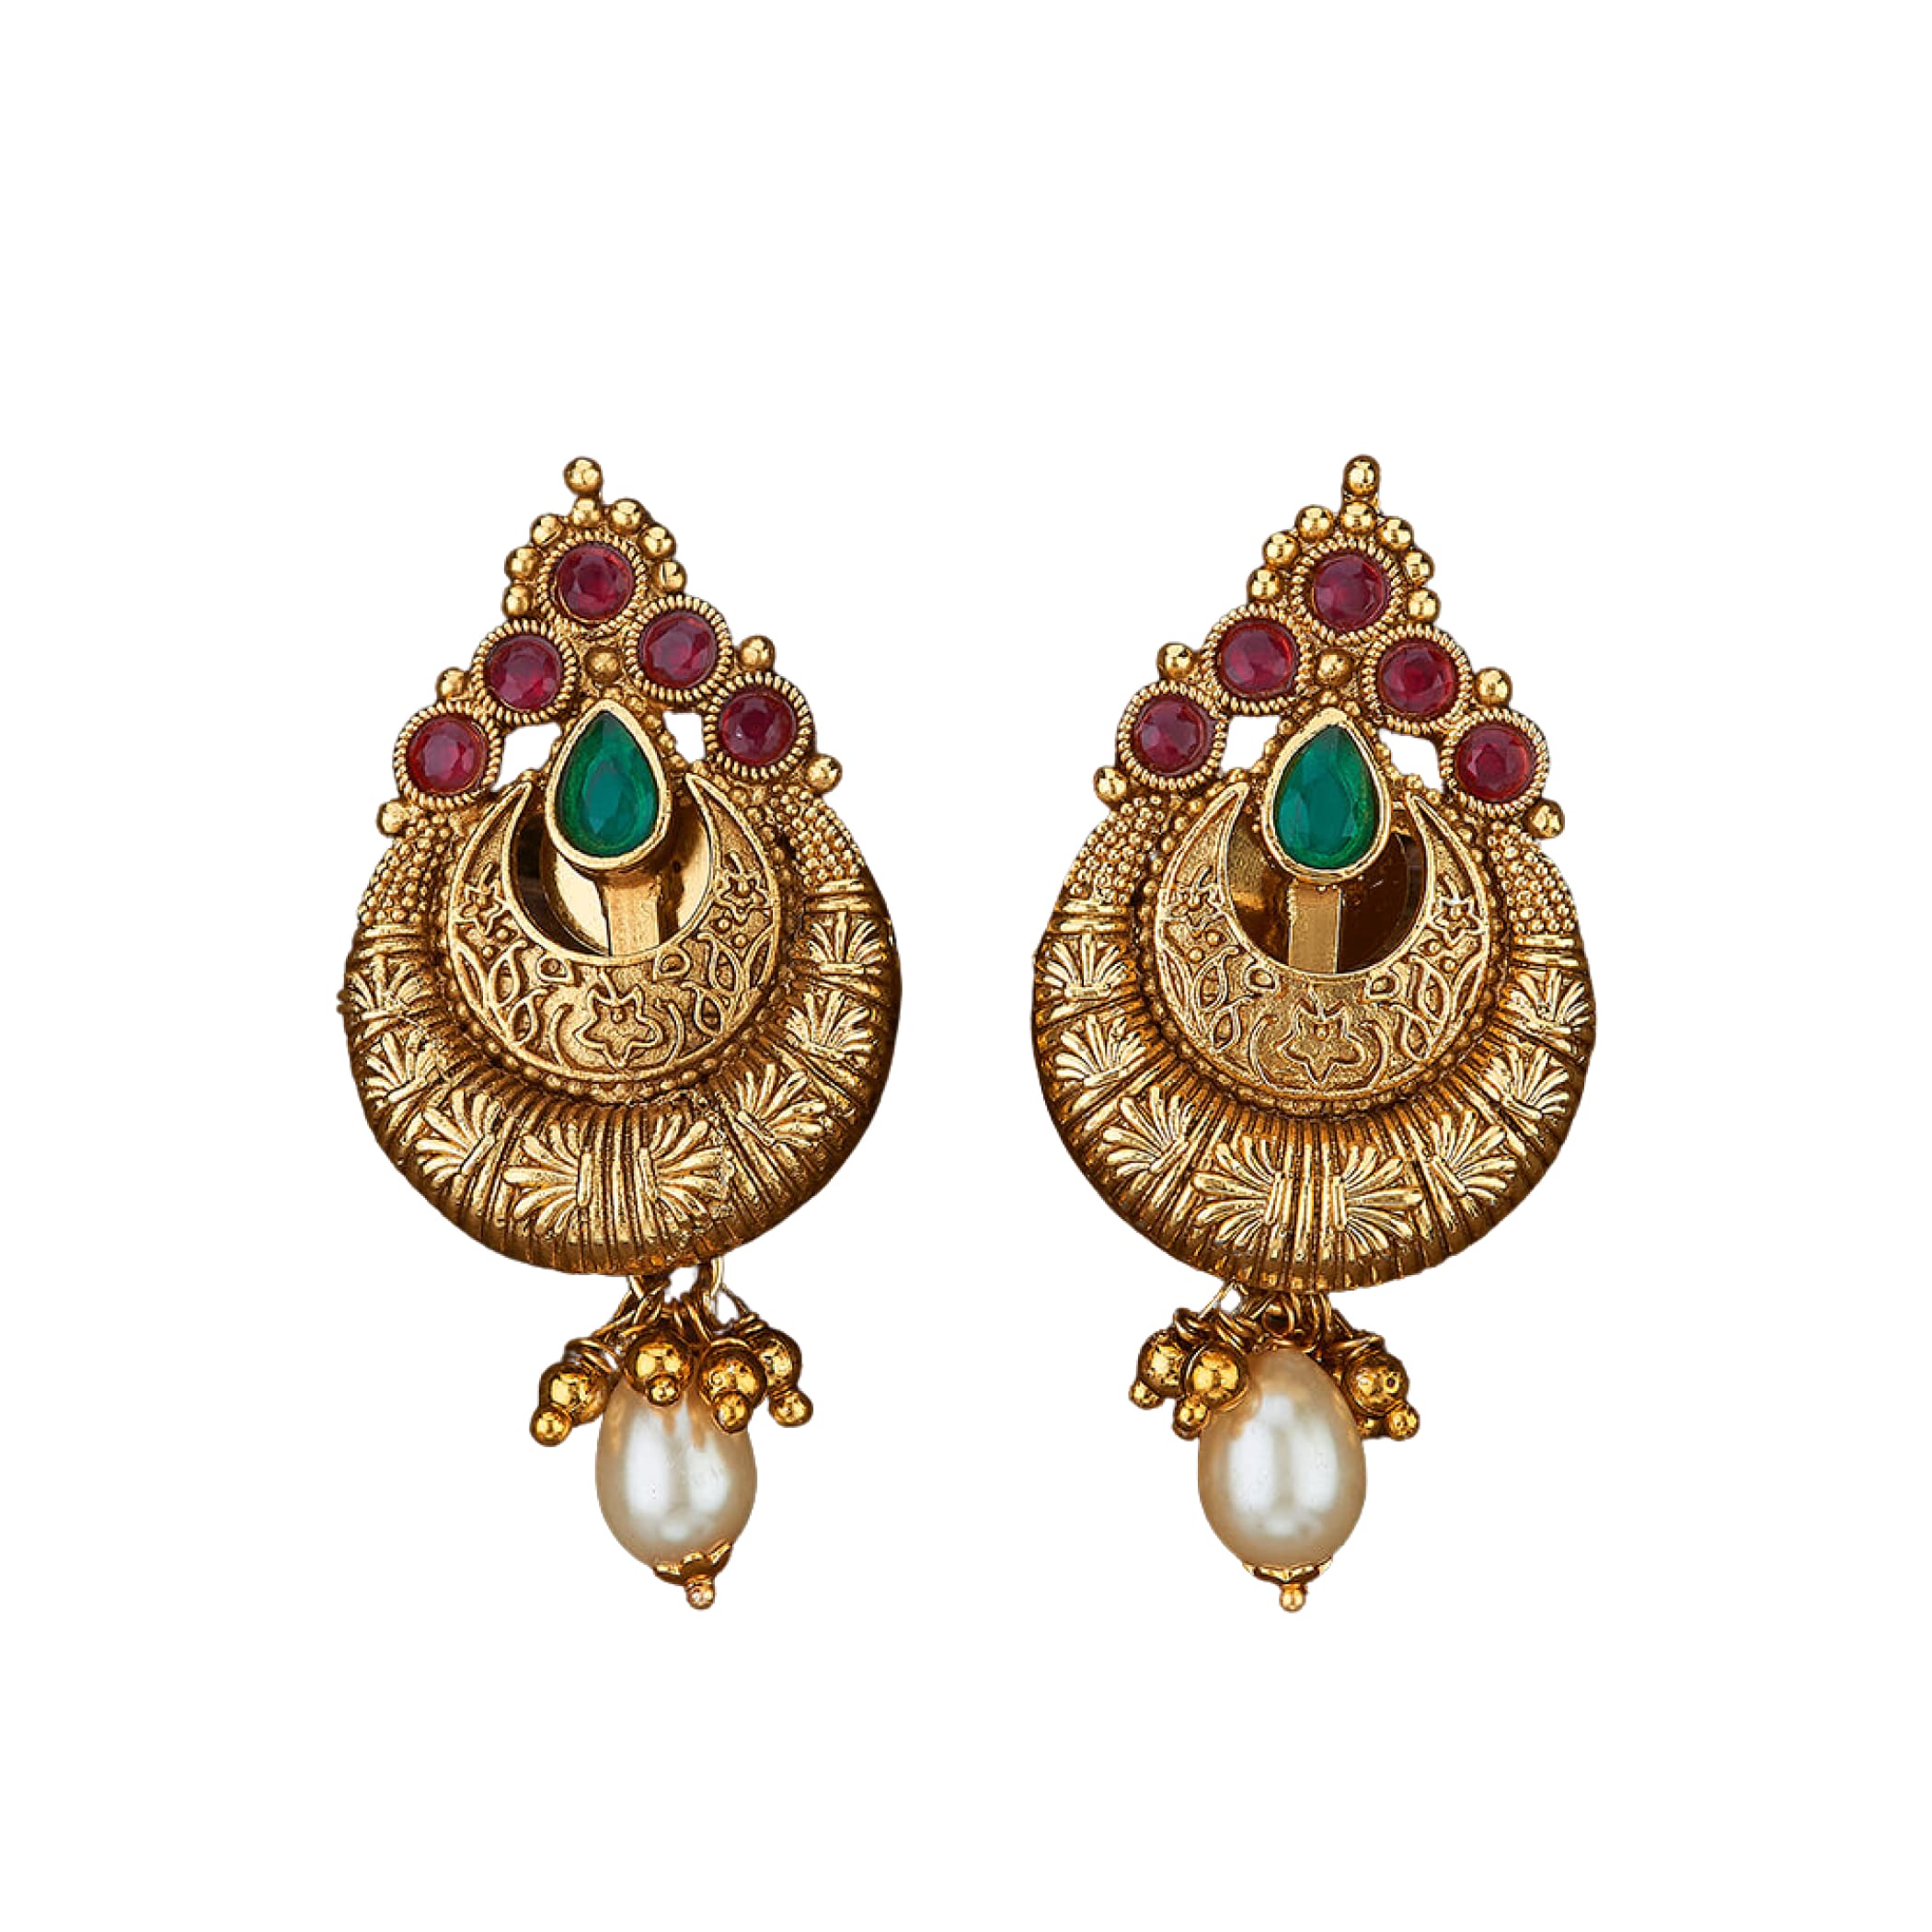 Ethnic earrings bollywood south indian jhumka traditional